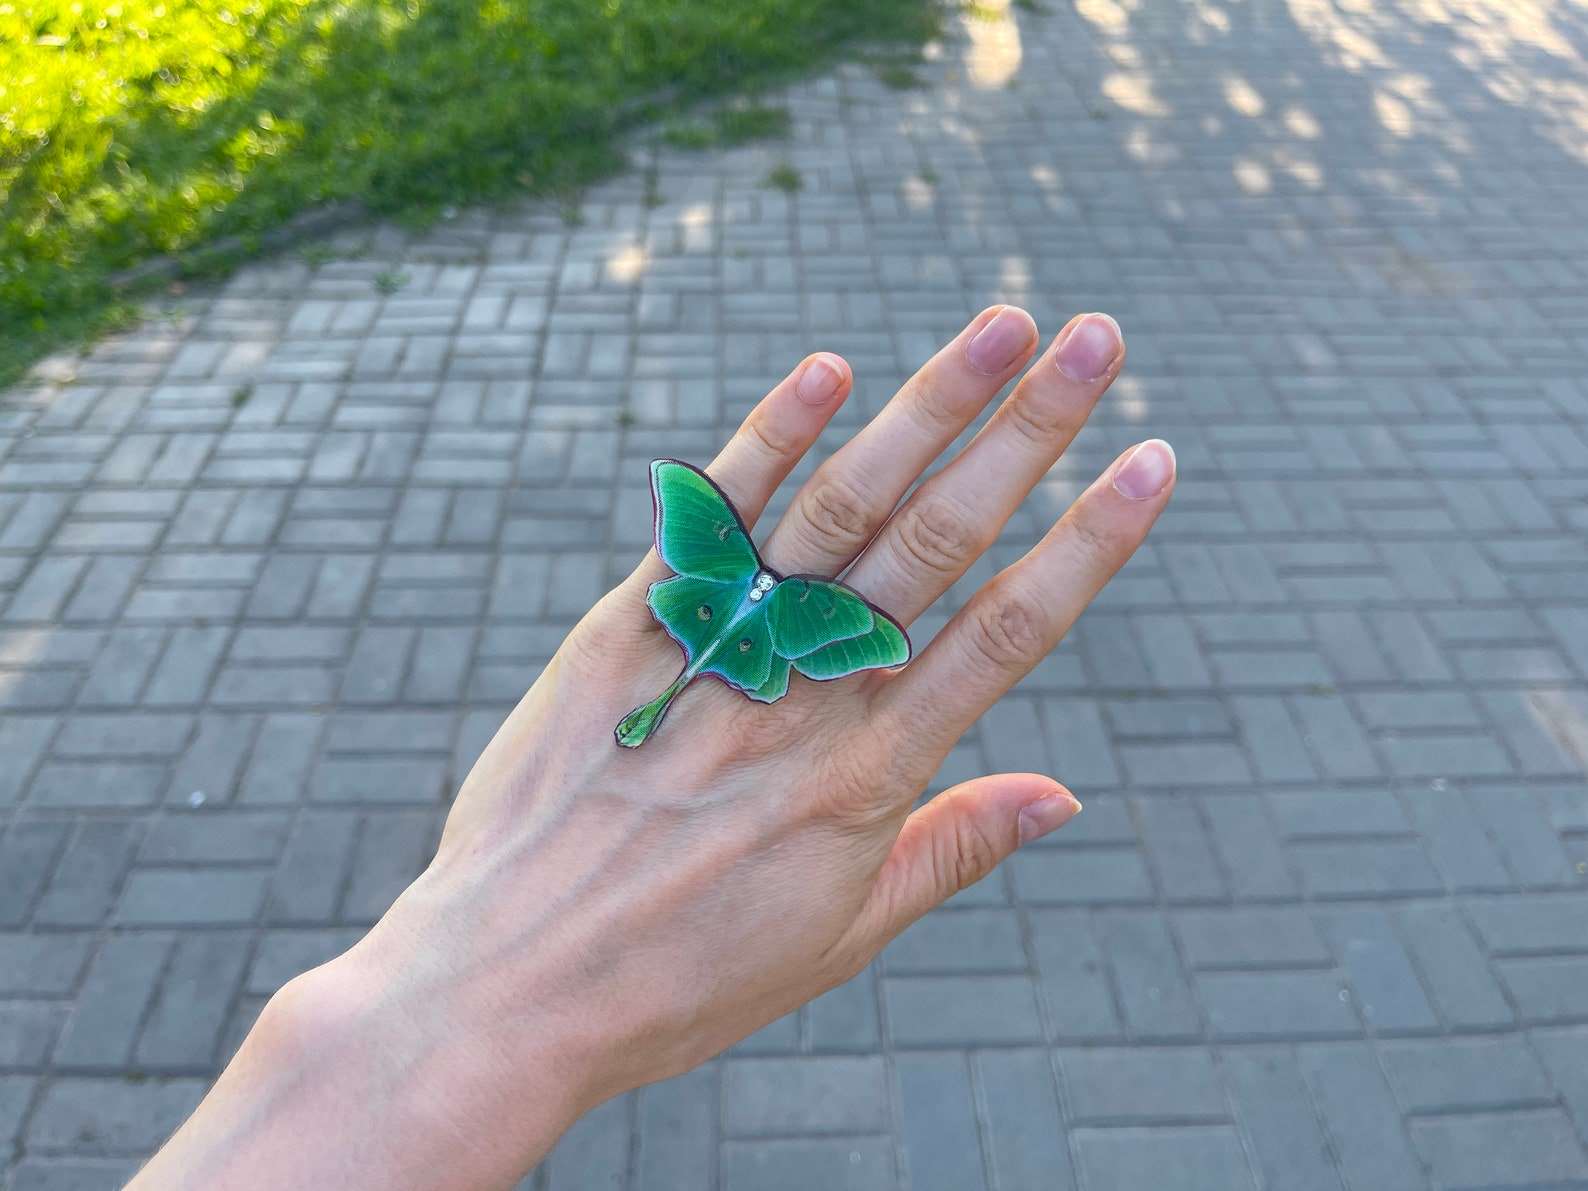 One-of-a-kind Luna Moth Ring perfect for any occasion